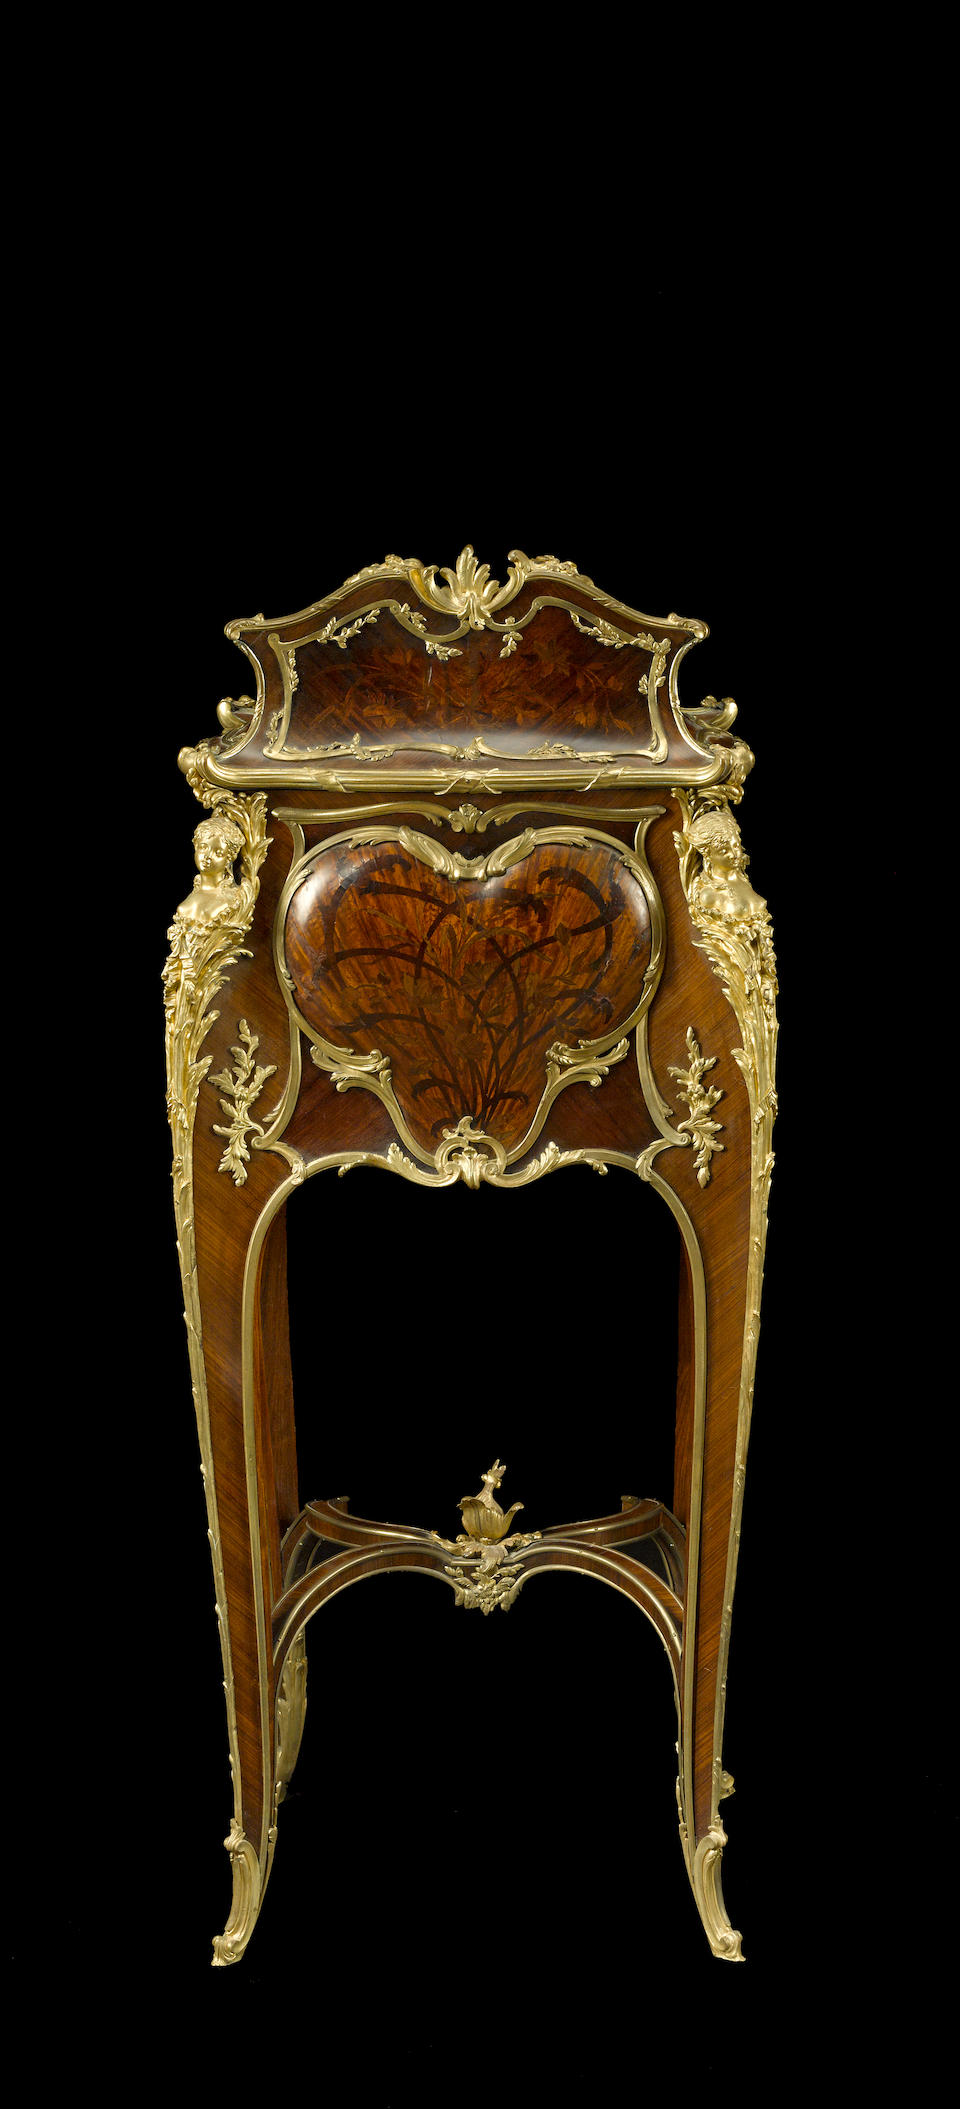 A fine and rare Louis XV style gilt bronze mounted marquetry and rosewood table de nuit Emmanuel Zwienerfourth quarter 19th century